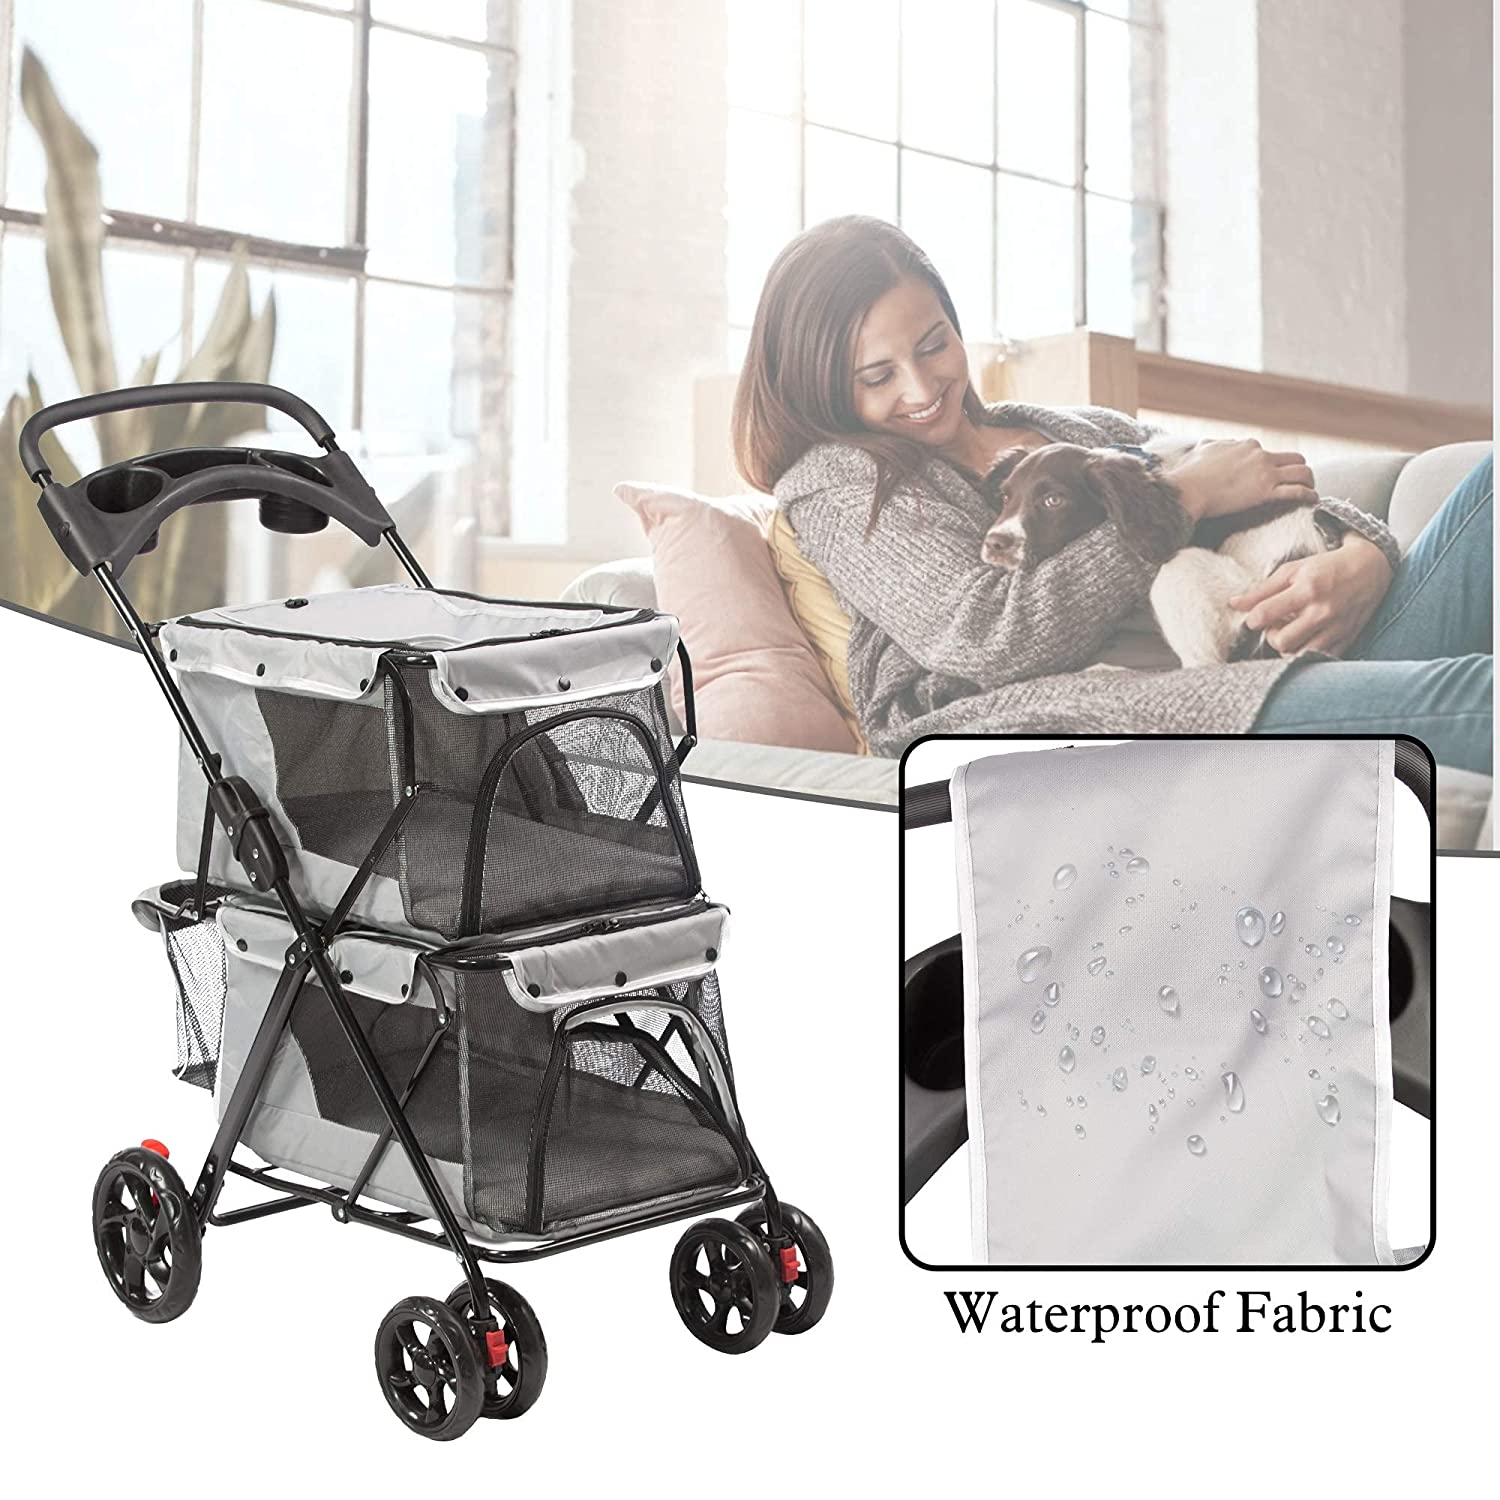 Double Seater Pet Stroller Folding Dog Stroller Travel Cage Stroller with Cup Holders and Mesh Window, Gray